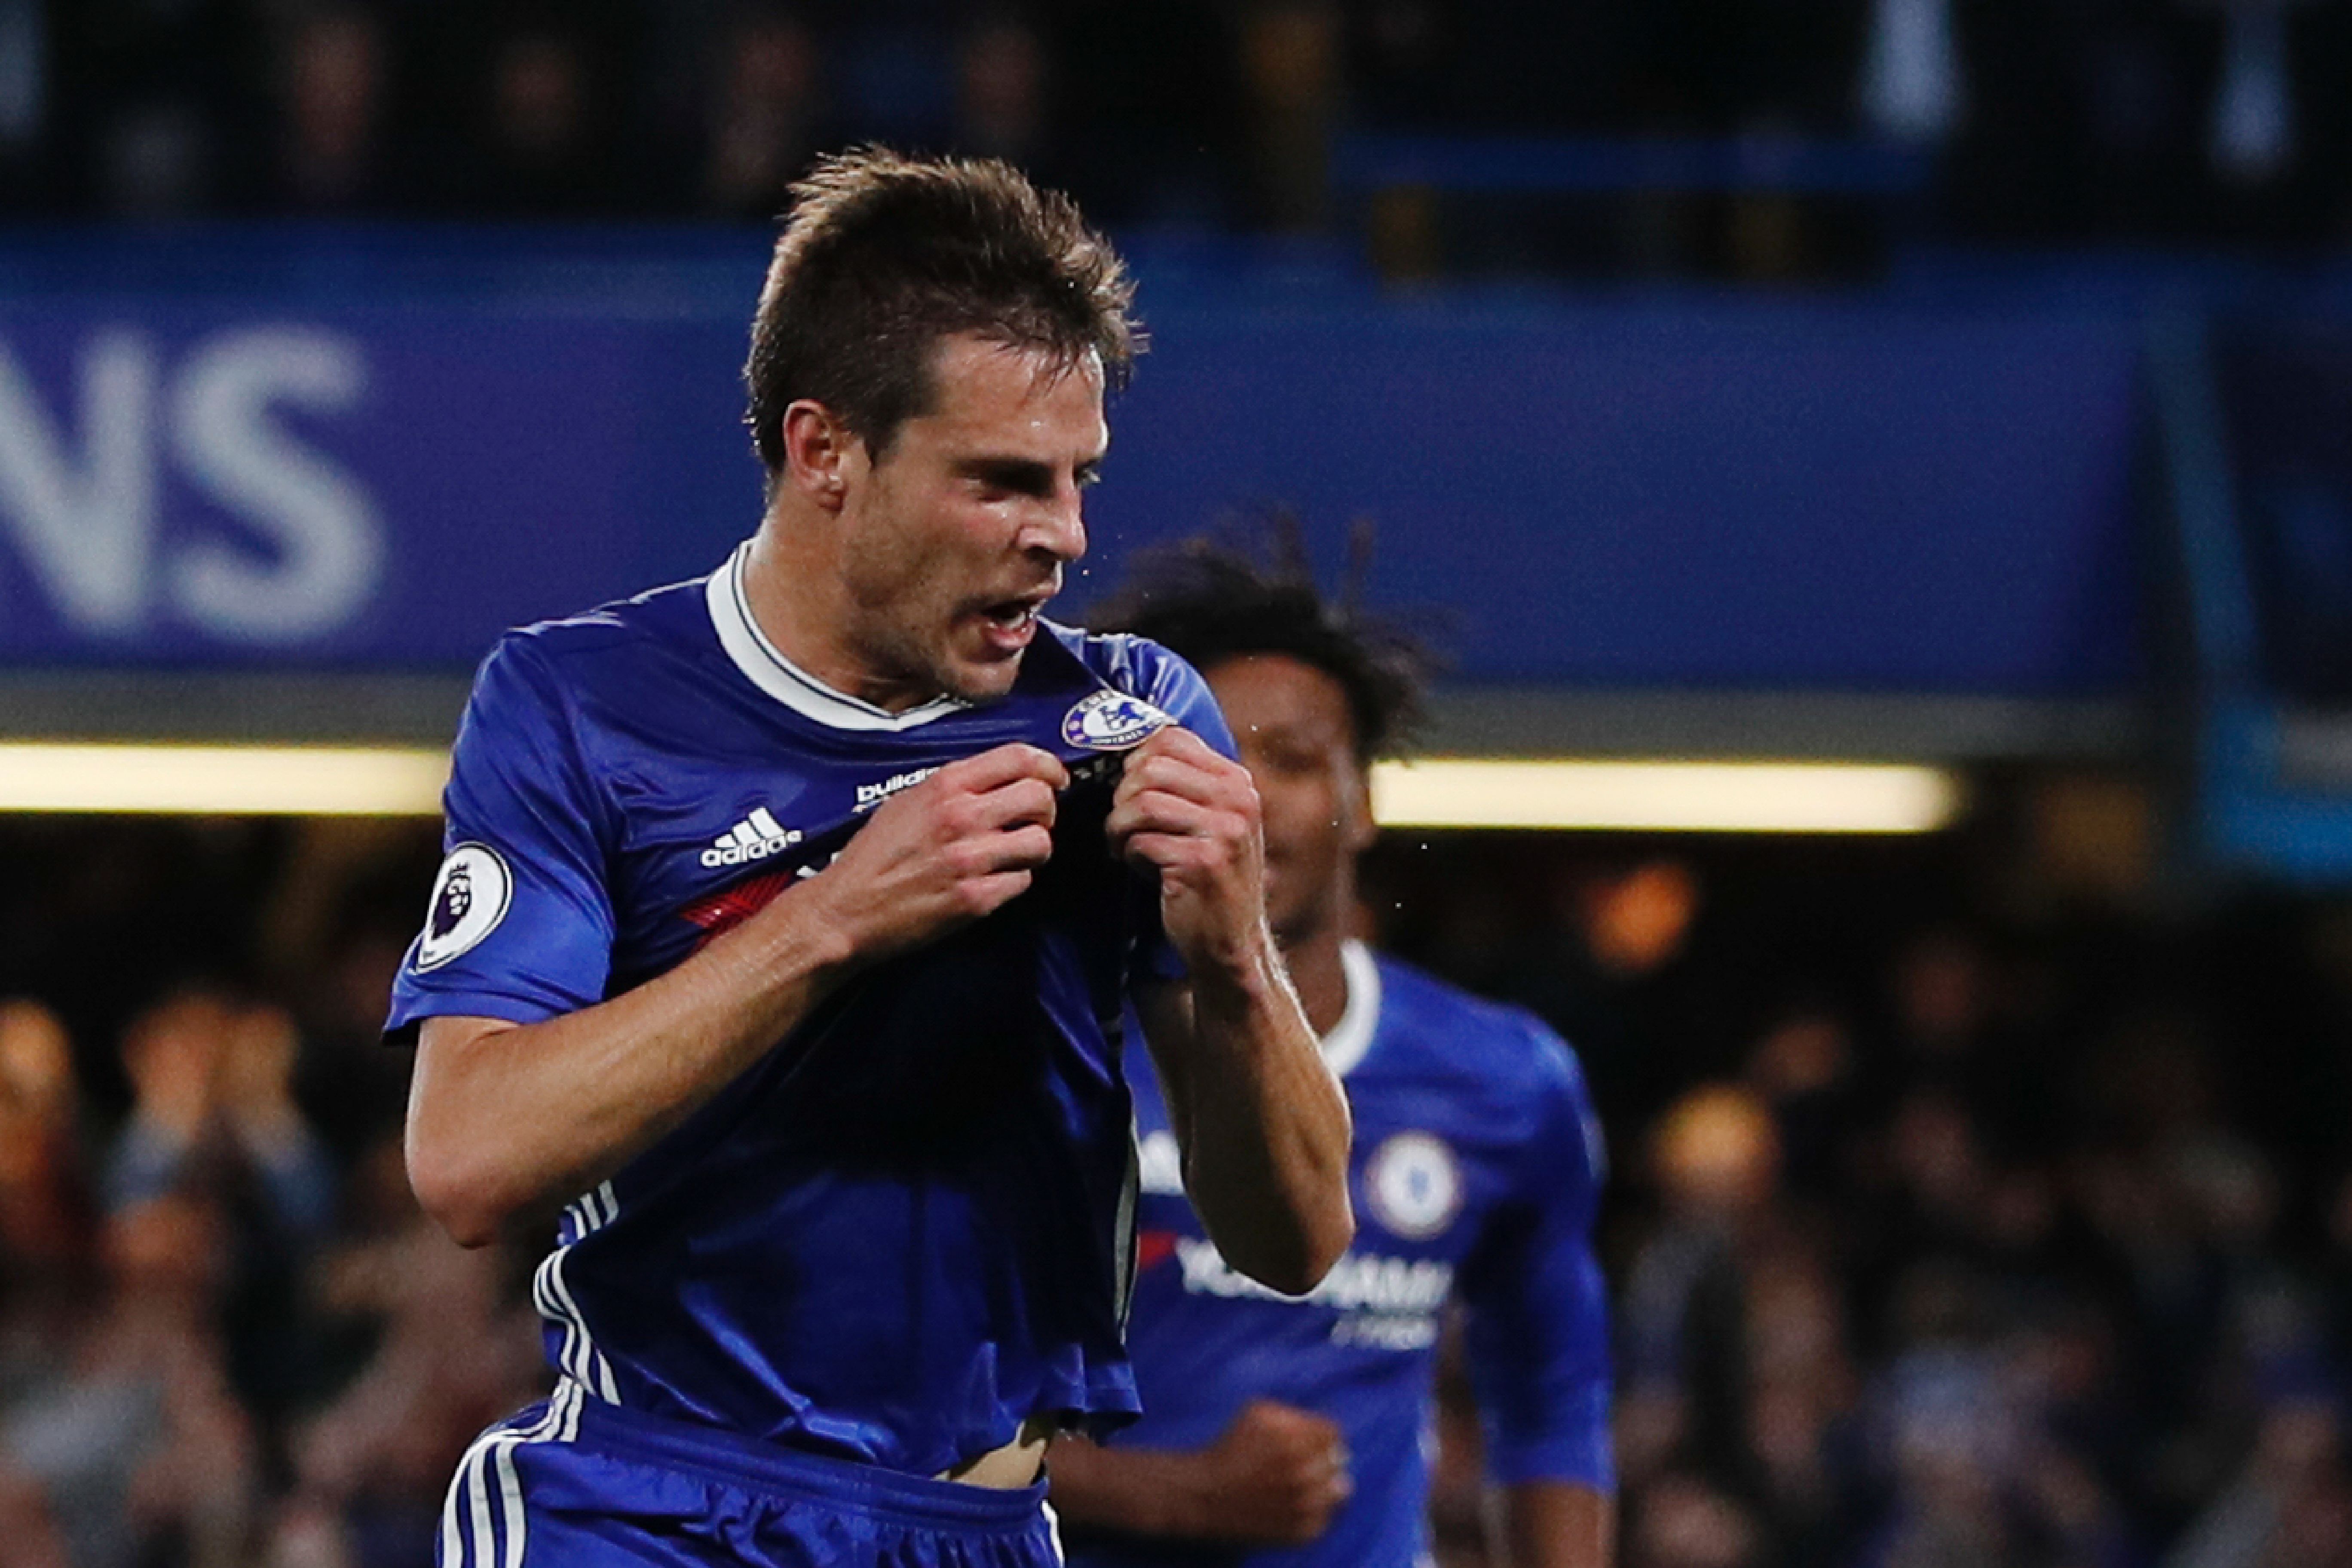 Chelsea's Spanish defender Cesar Azpilicueta celebrates scoring their second goal during the English Premier League football match between Chelsea and Watford at Stamford Bridge in London on May 15, 2017. / AFP PHOTO / Adrian DENNIS / RESTRICTED TO EDITORIAL USE. No use with unauthorized audio, video, data, fixture lists, club/league logos or 'live' services. Online in-match use limited to 75 images, no video emulation. No use in betting, games or single club/league/player publications.  /         (Photo credit should read ADRIAN DENNIS/AFP/Getty Images)